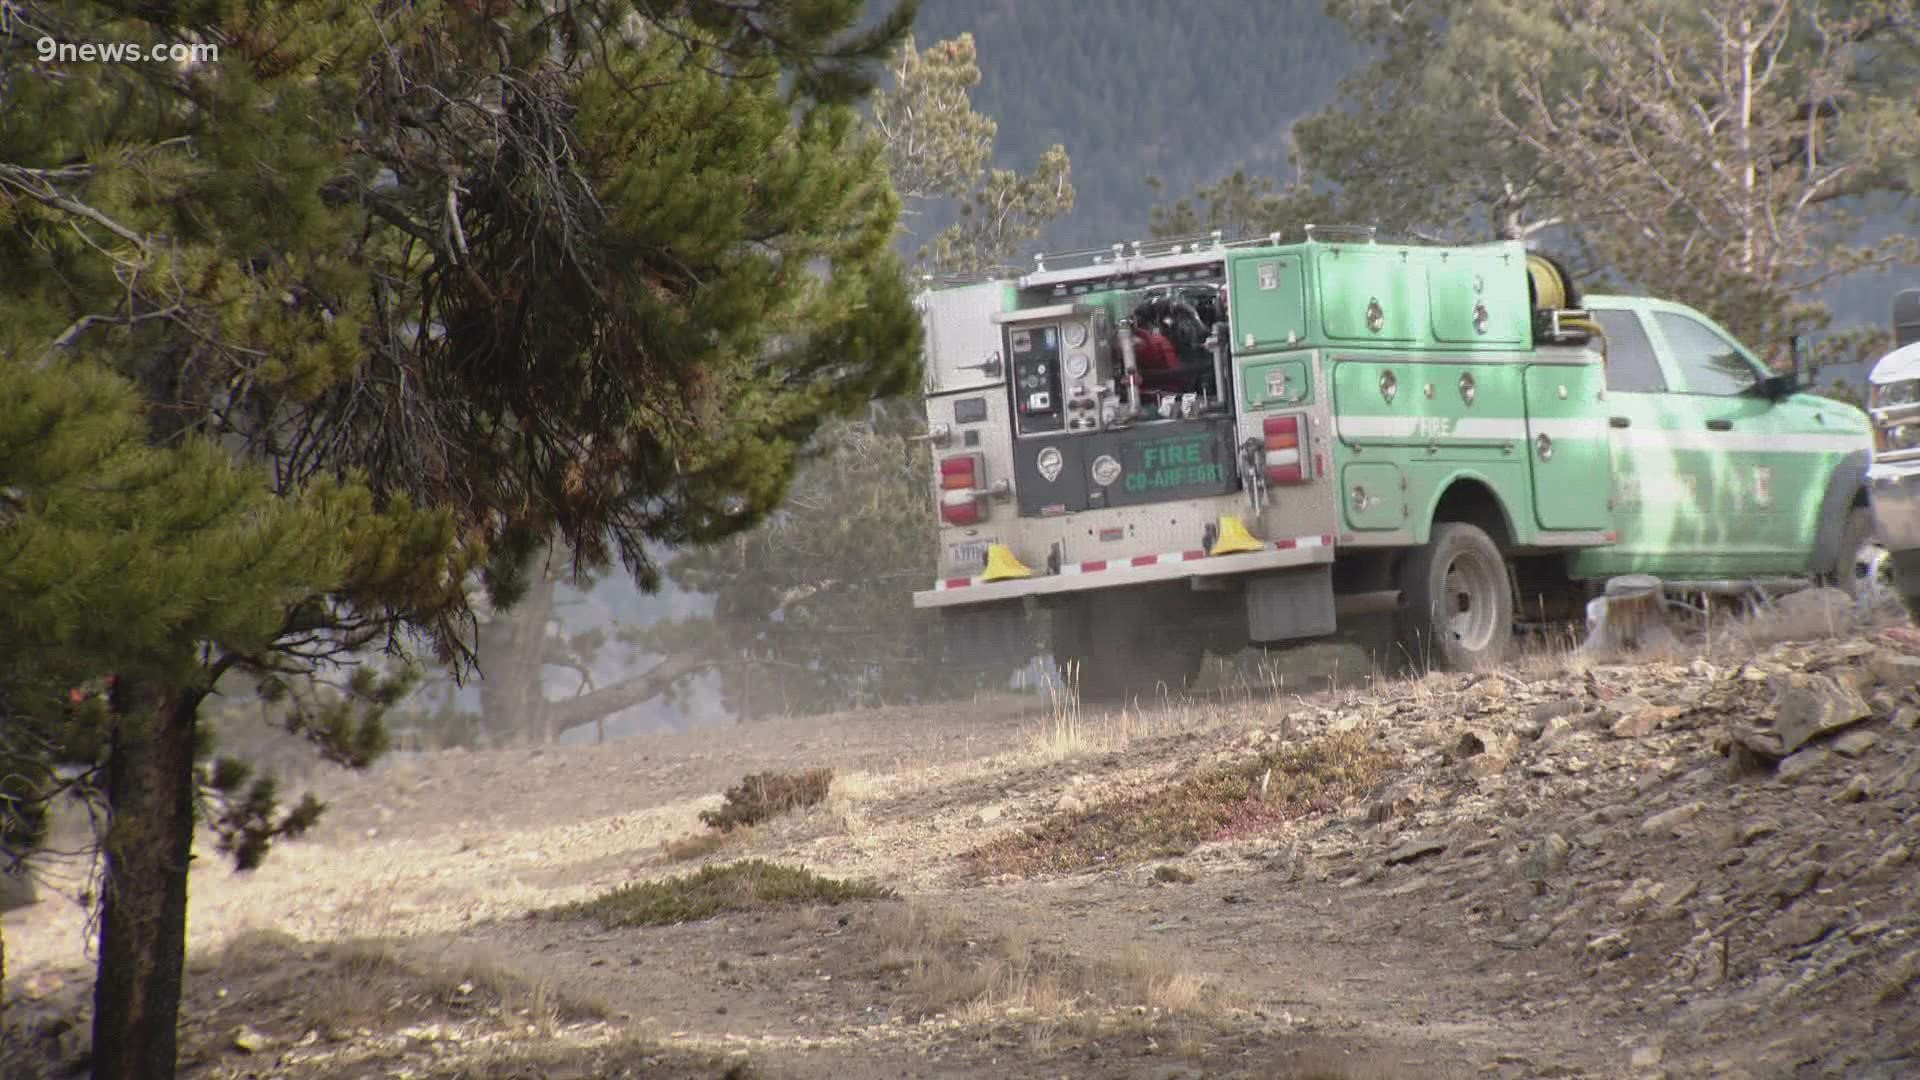 The Miners Candle Fire west of Idaho Springs is 50% contained. Evacuation orders were lifted Monday morning.